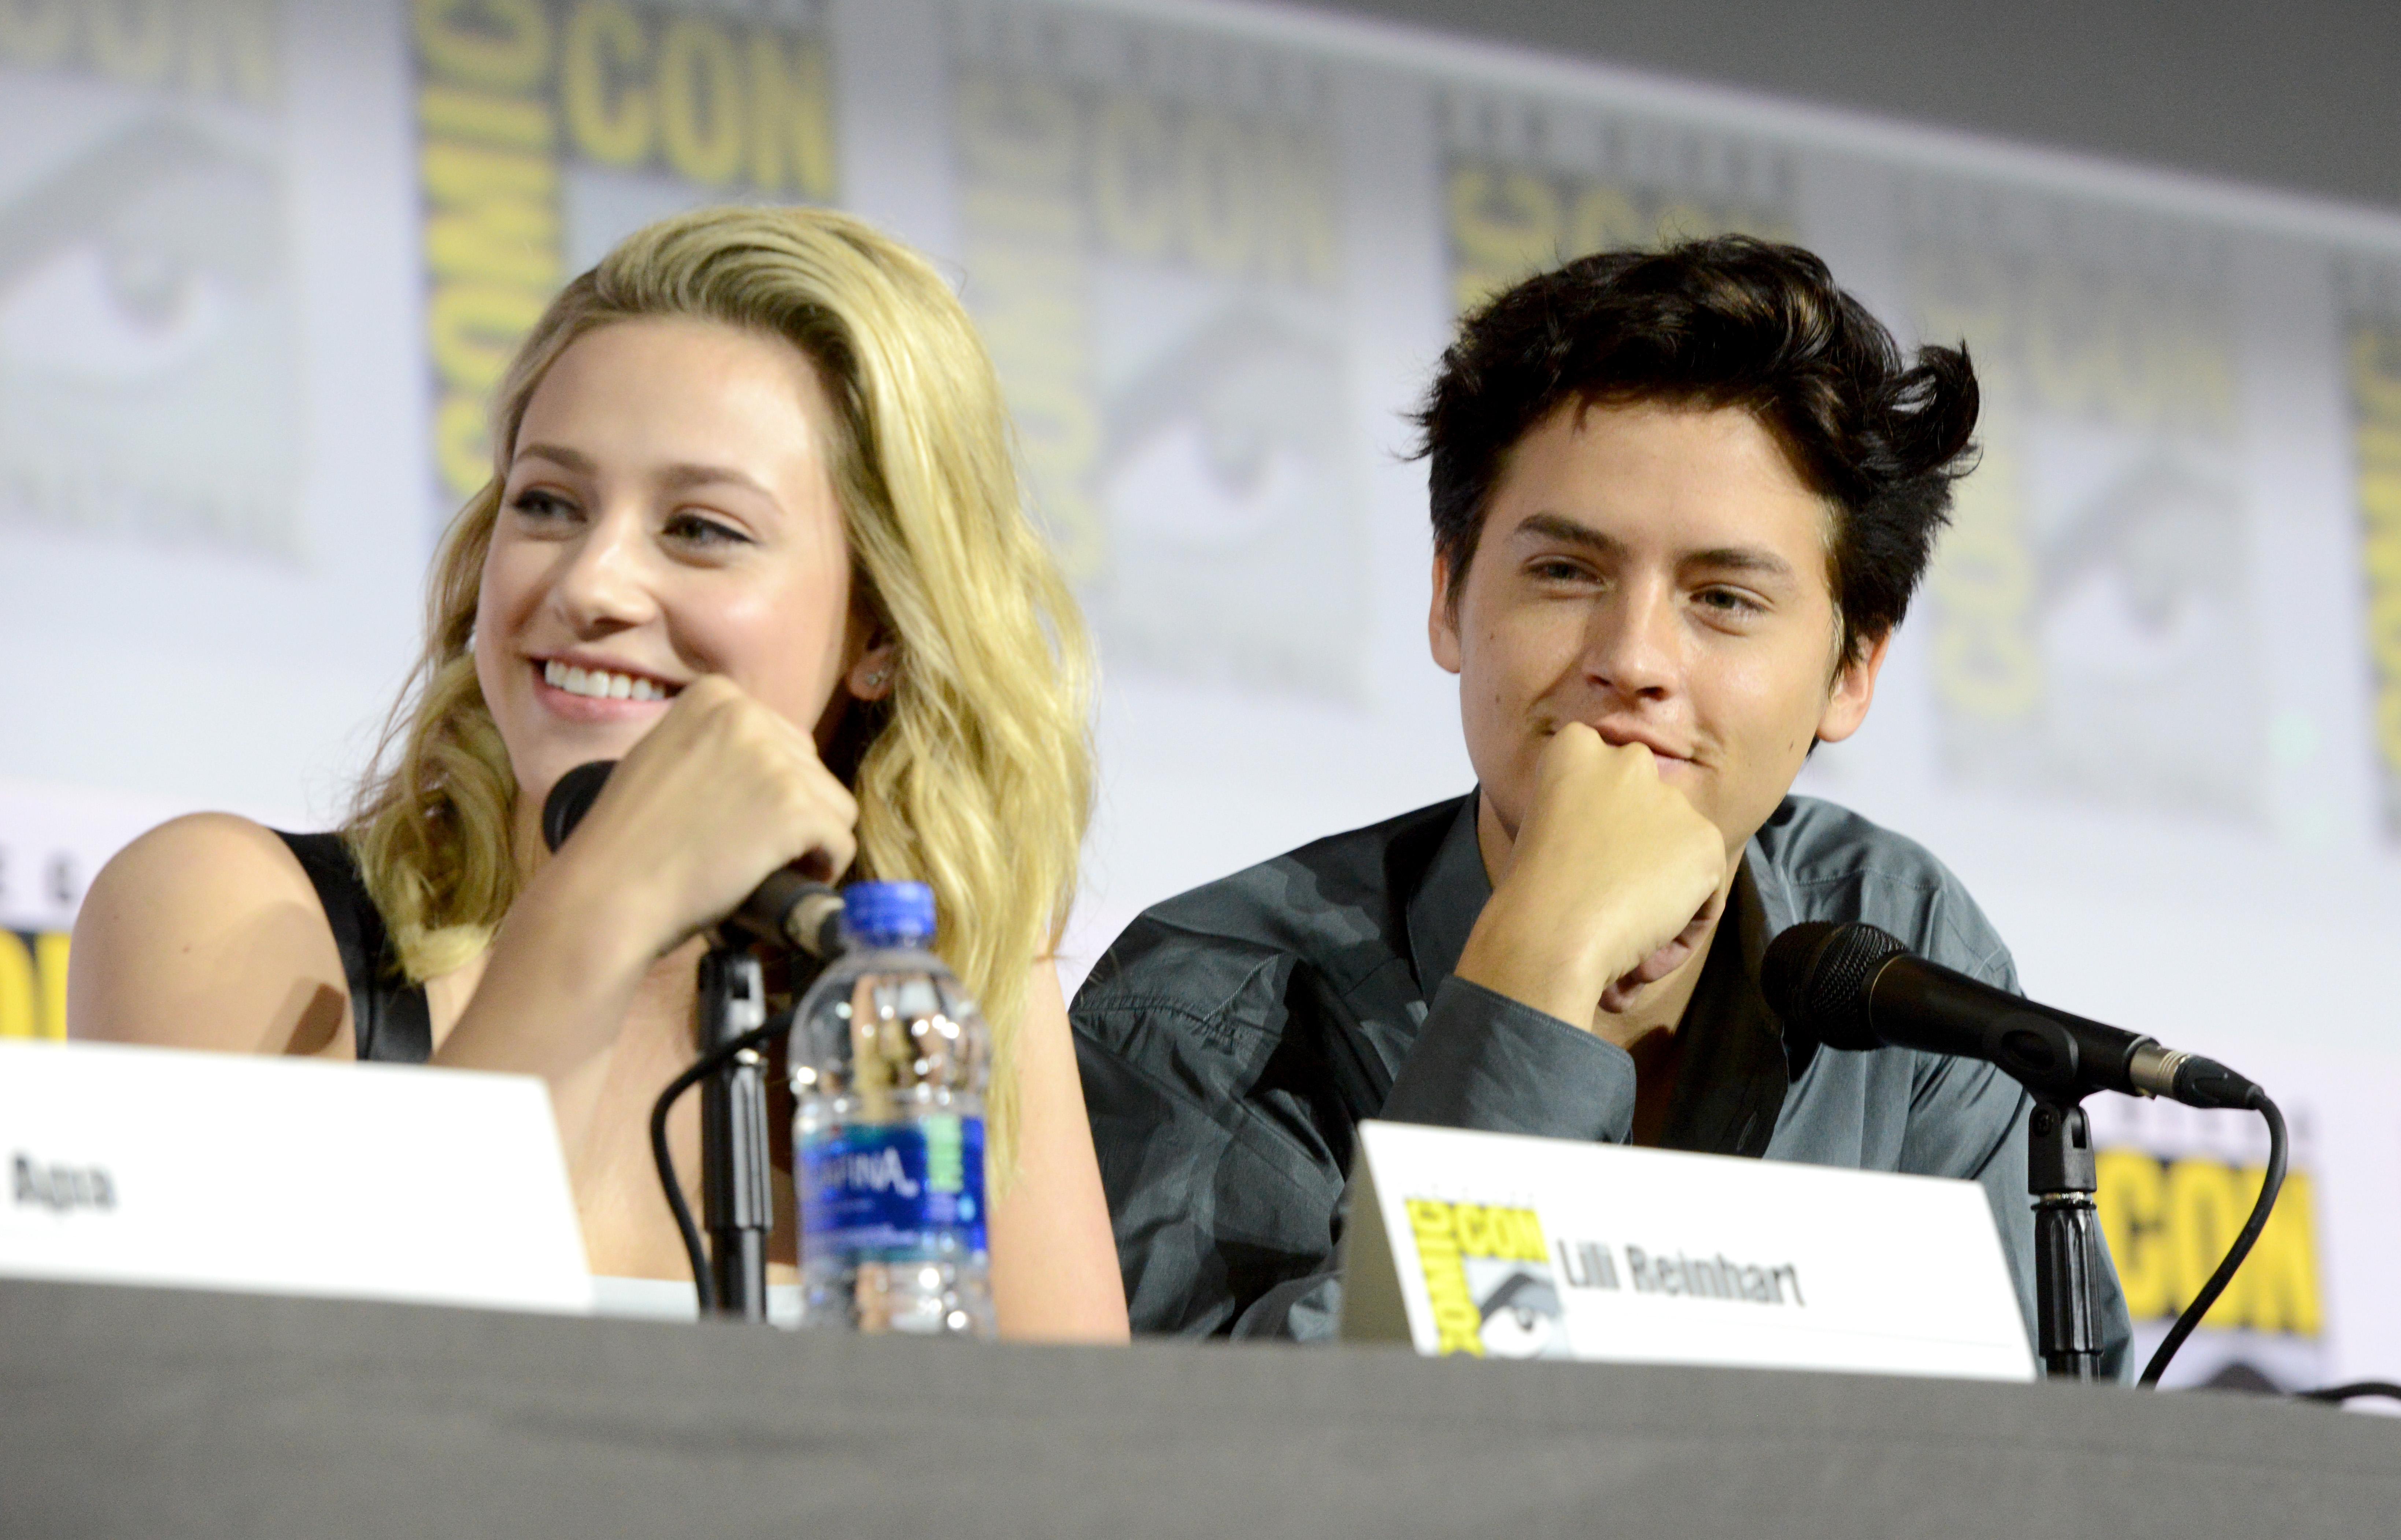 Lili Reinhart and Cole Sprouse attend Comic-Con.